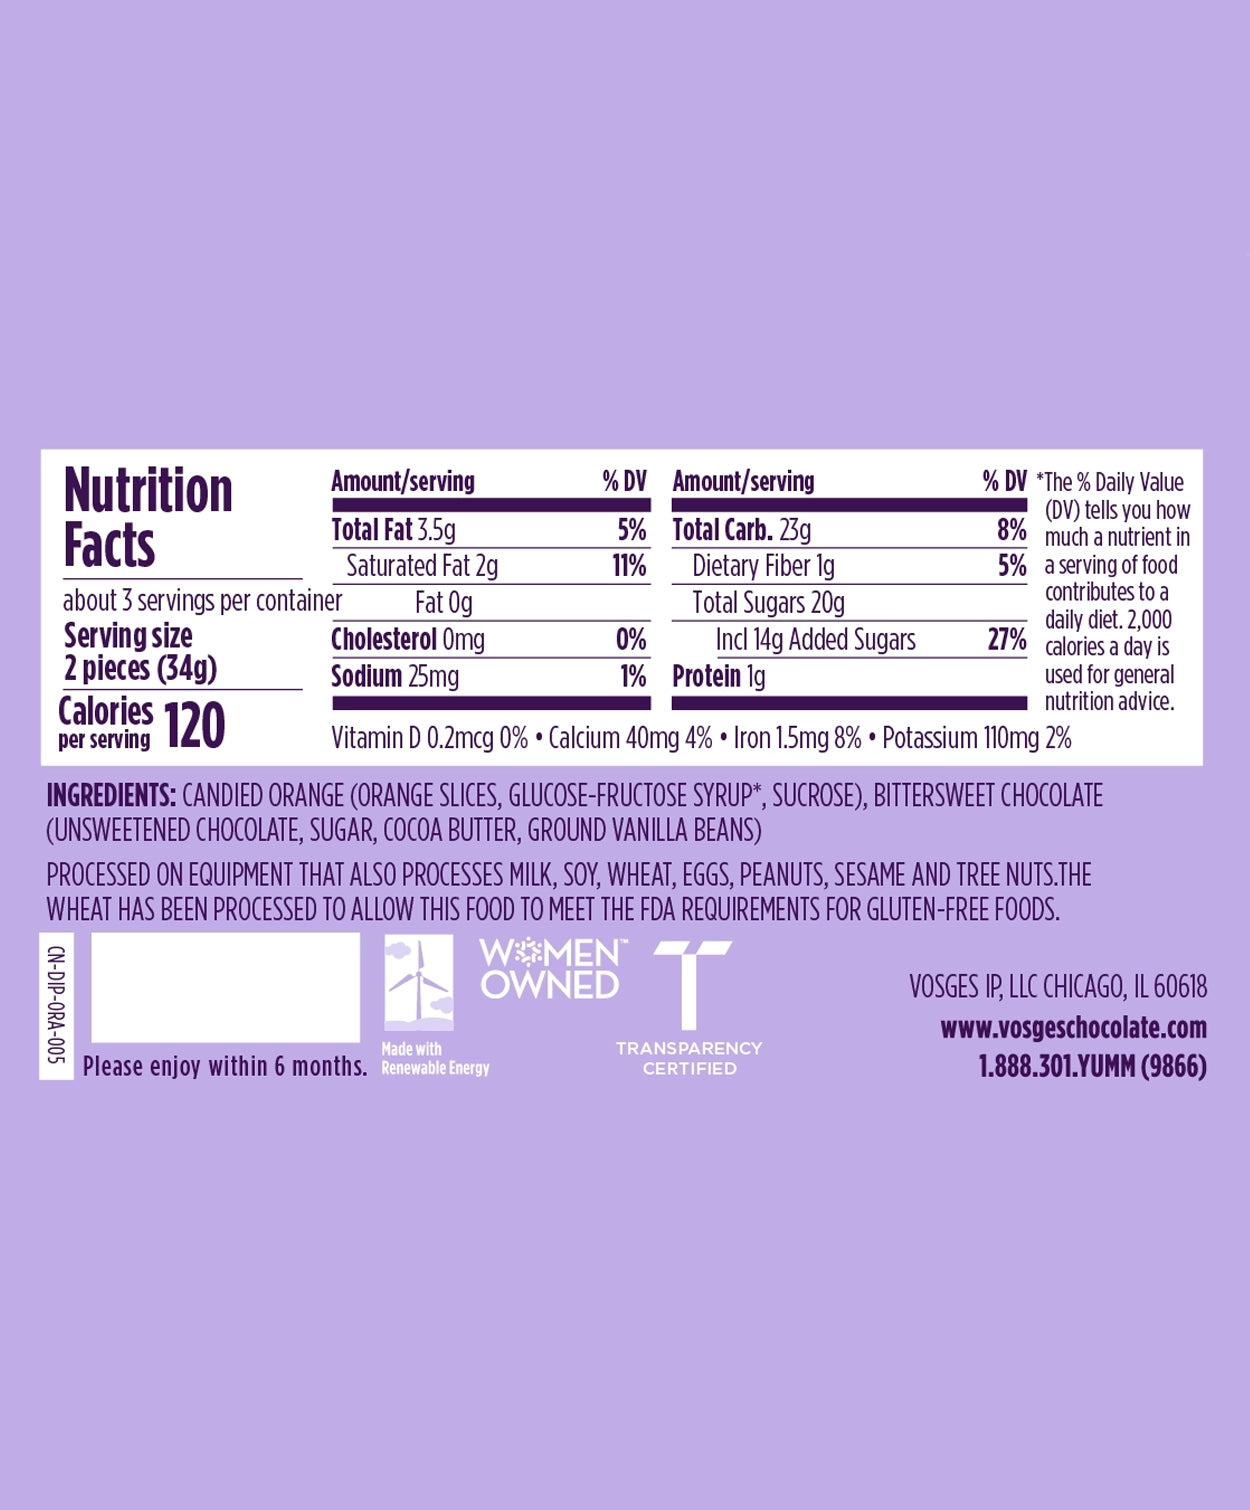 Nutrition Facts and Ingredients of Vosges Haut-Chocolat Chocolate Dipped Lunar Orange Fruit in purple, san-serif font on a light purple background.